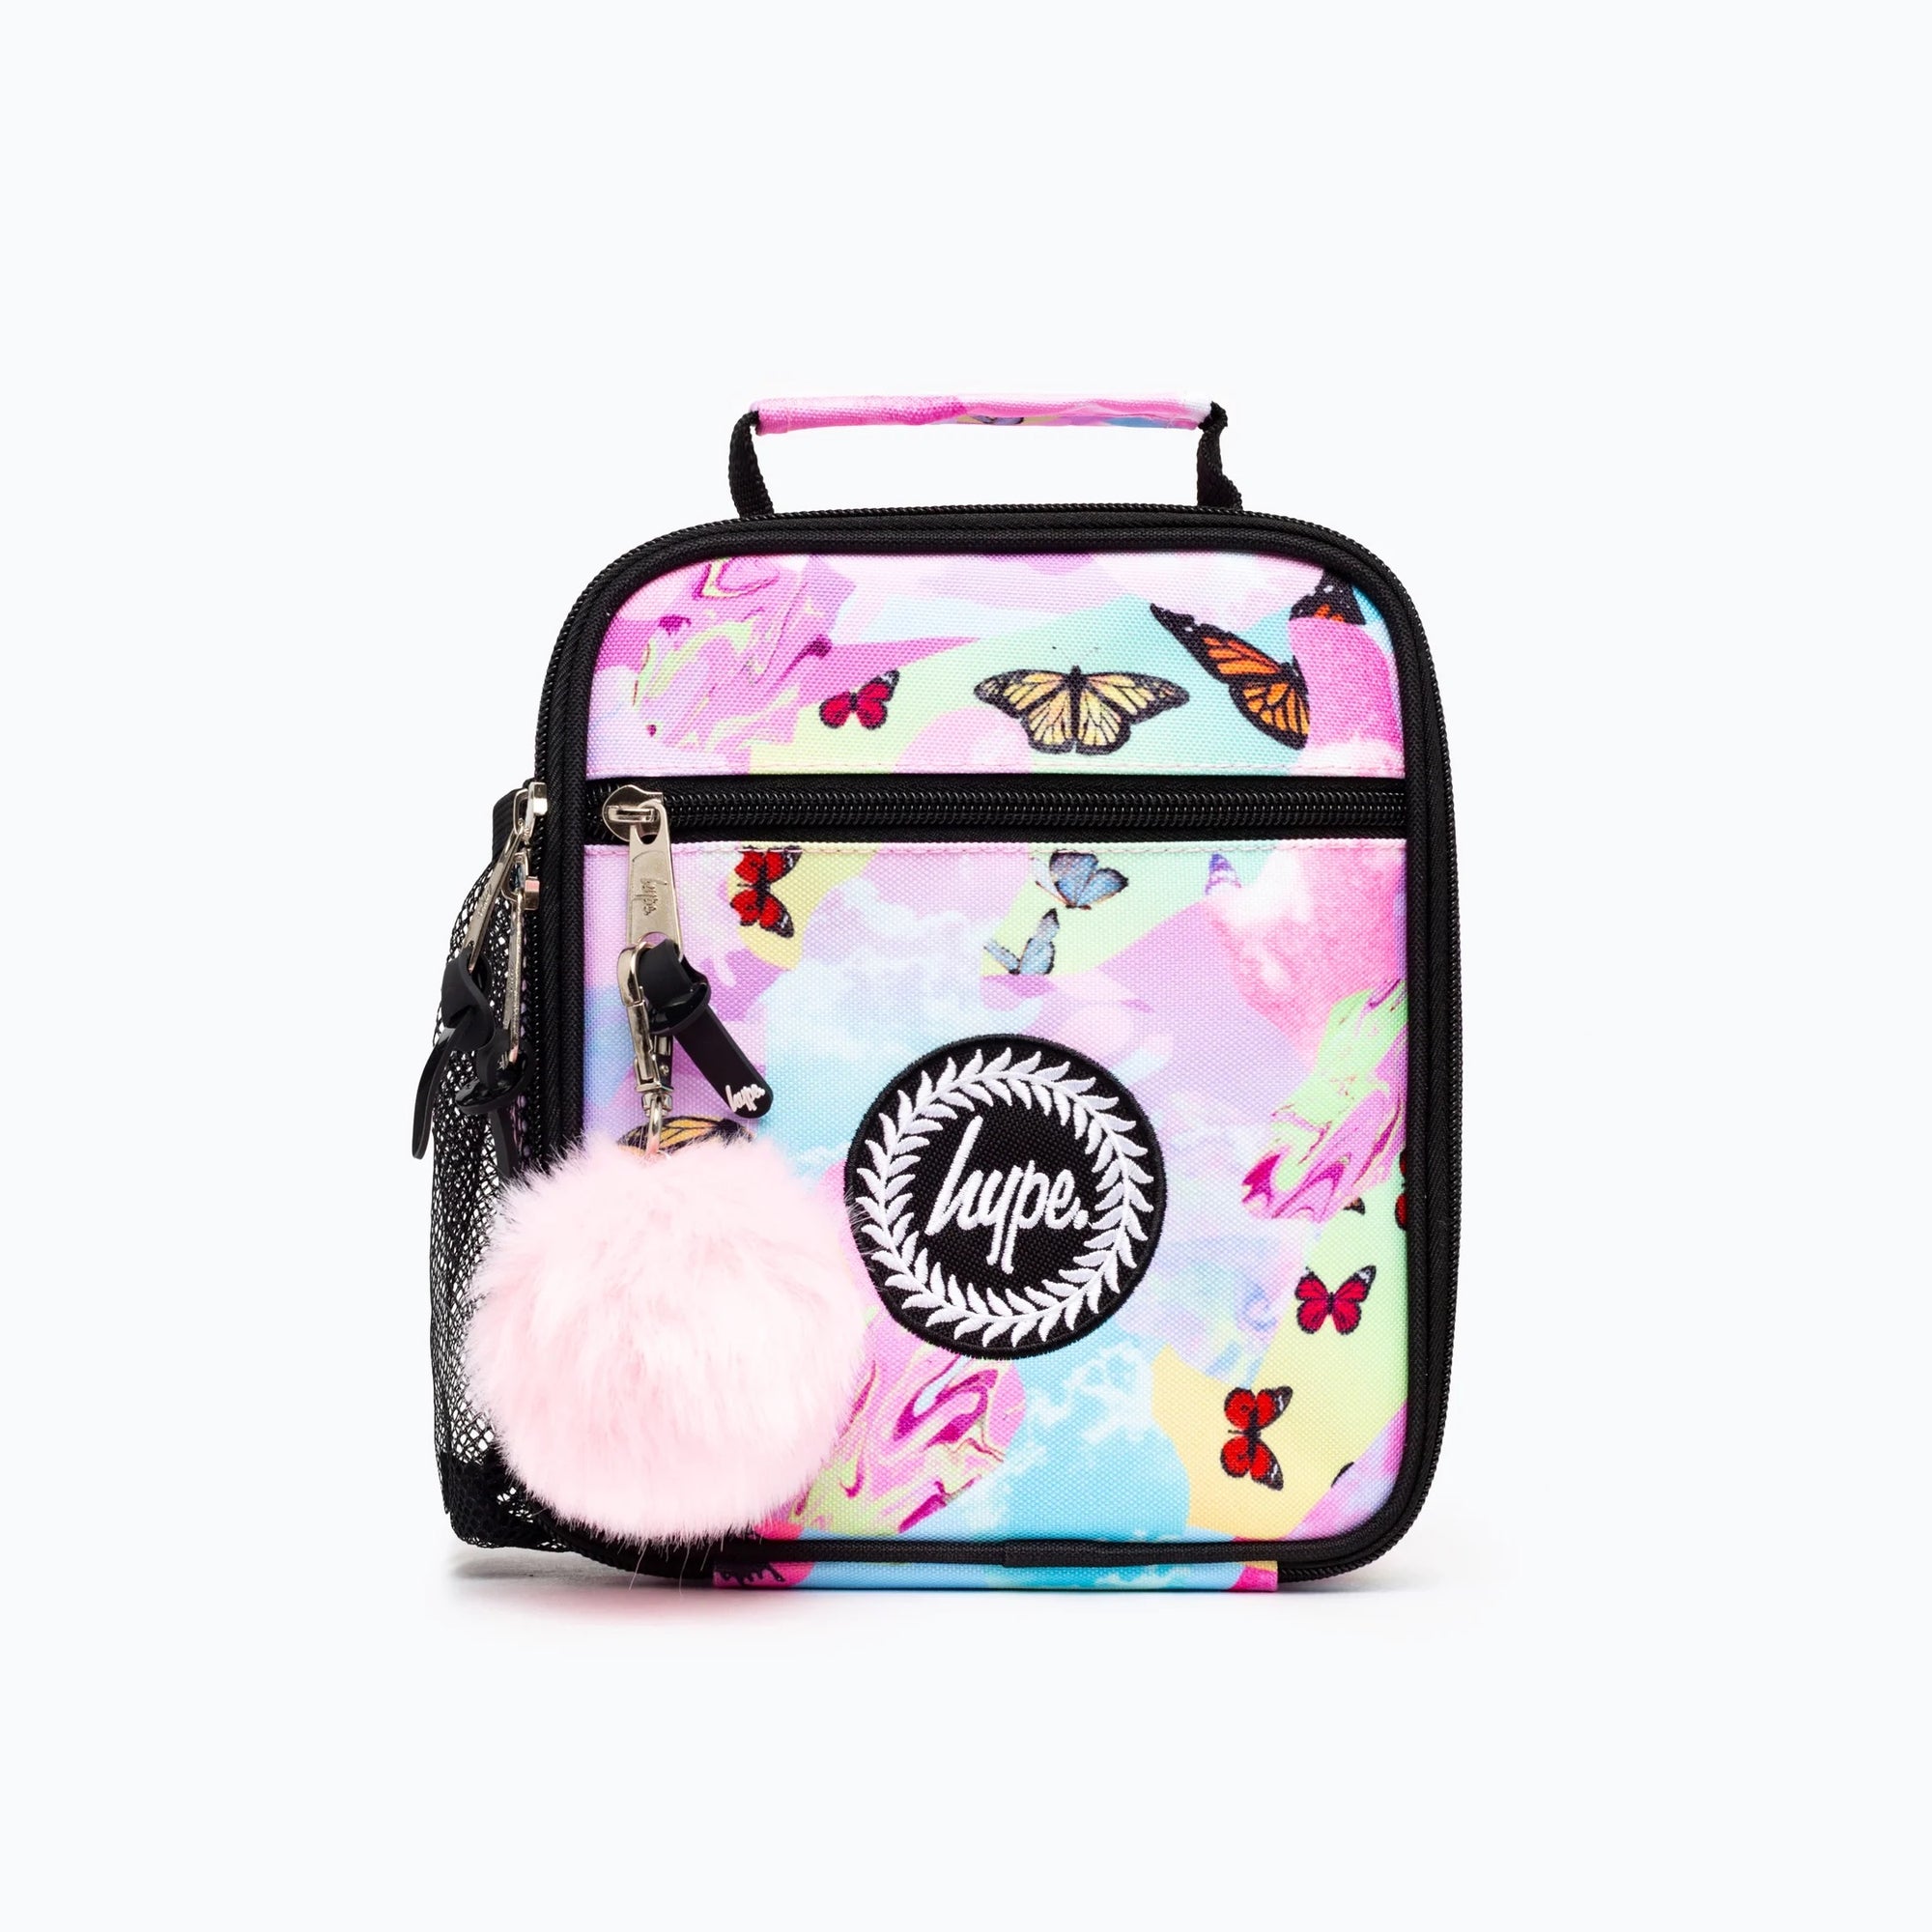 Hype Rainbow Butterfly Skies Lunch Bag Xucb-118 Accessories ONE SIZE / Multi